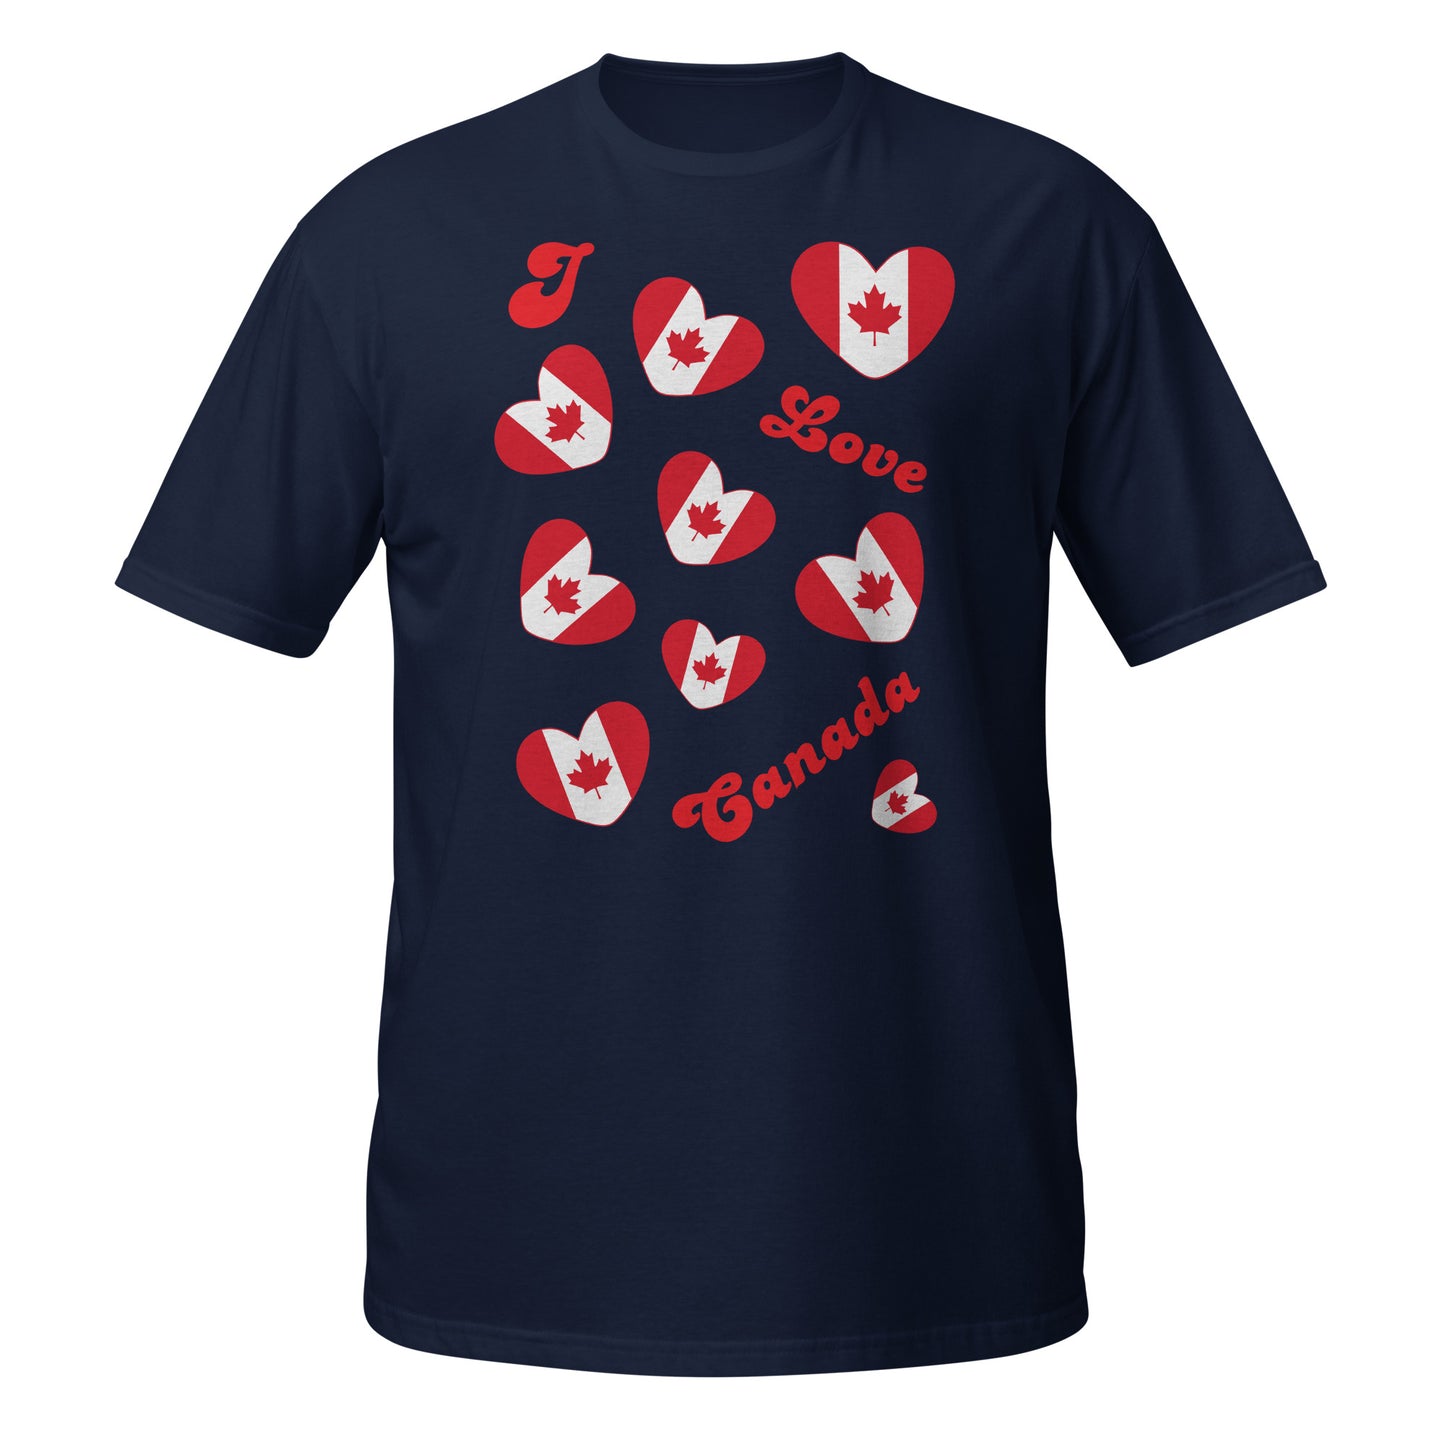 Lightweight I Love Canada T-Shirt, breathable for summer celebrations